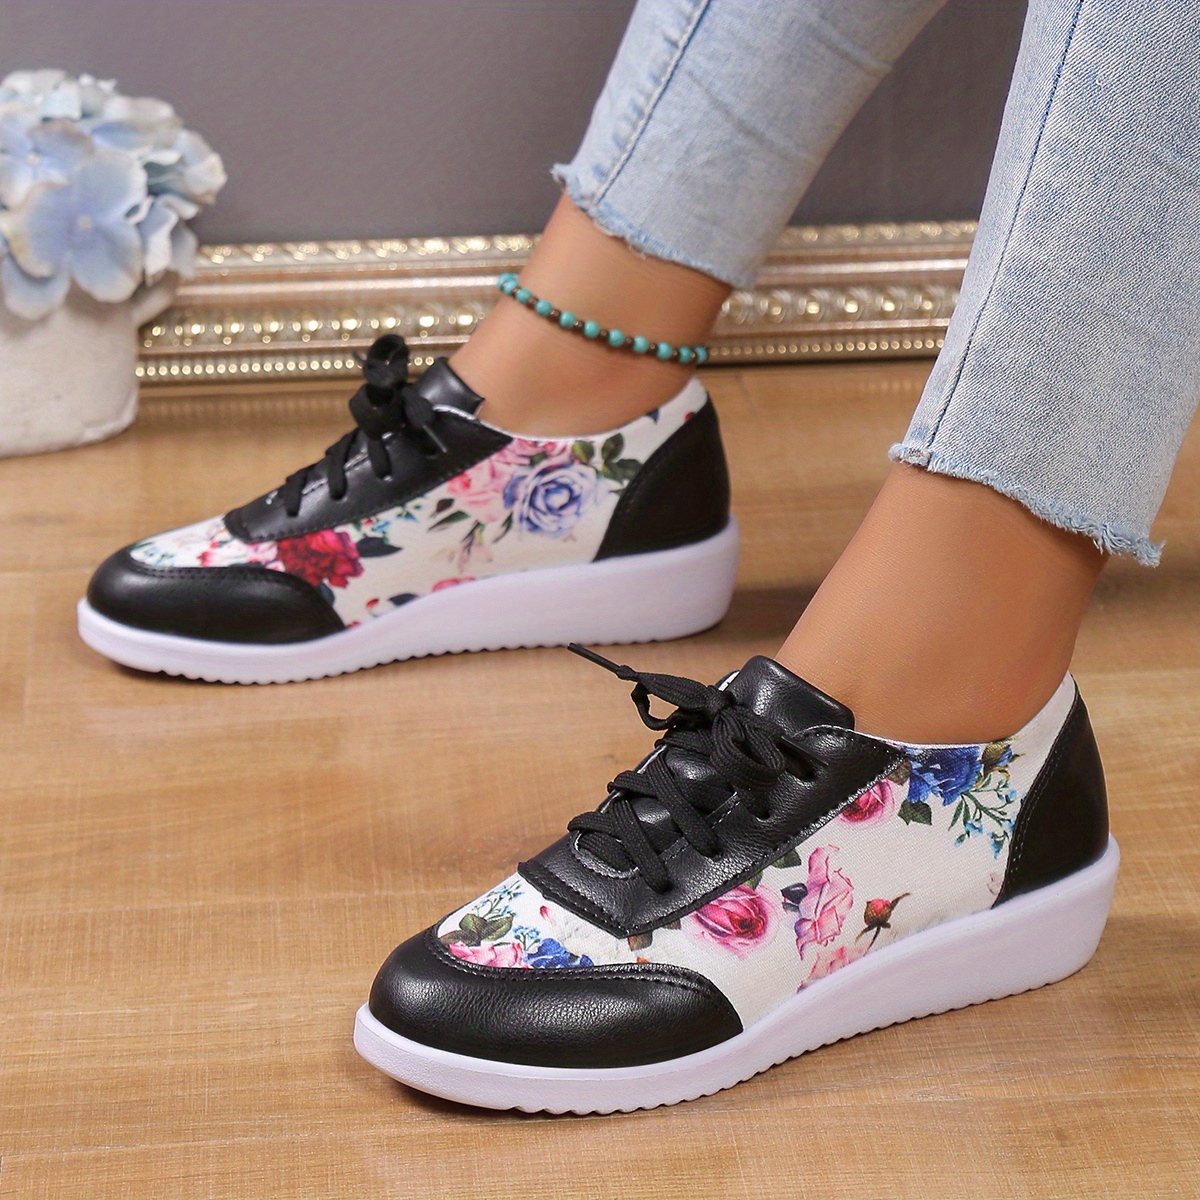 womens floral print sneakers lace up low top round toe non slip outdoor lightweight trainers casual versatile shoes details 3